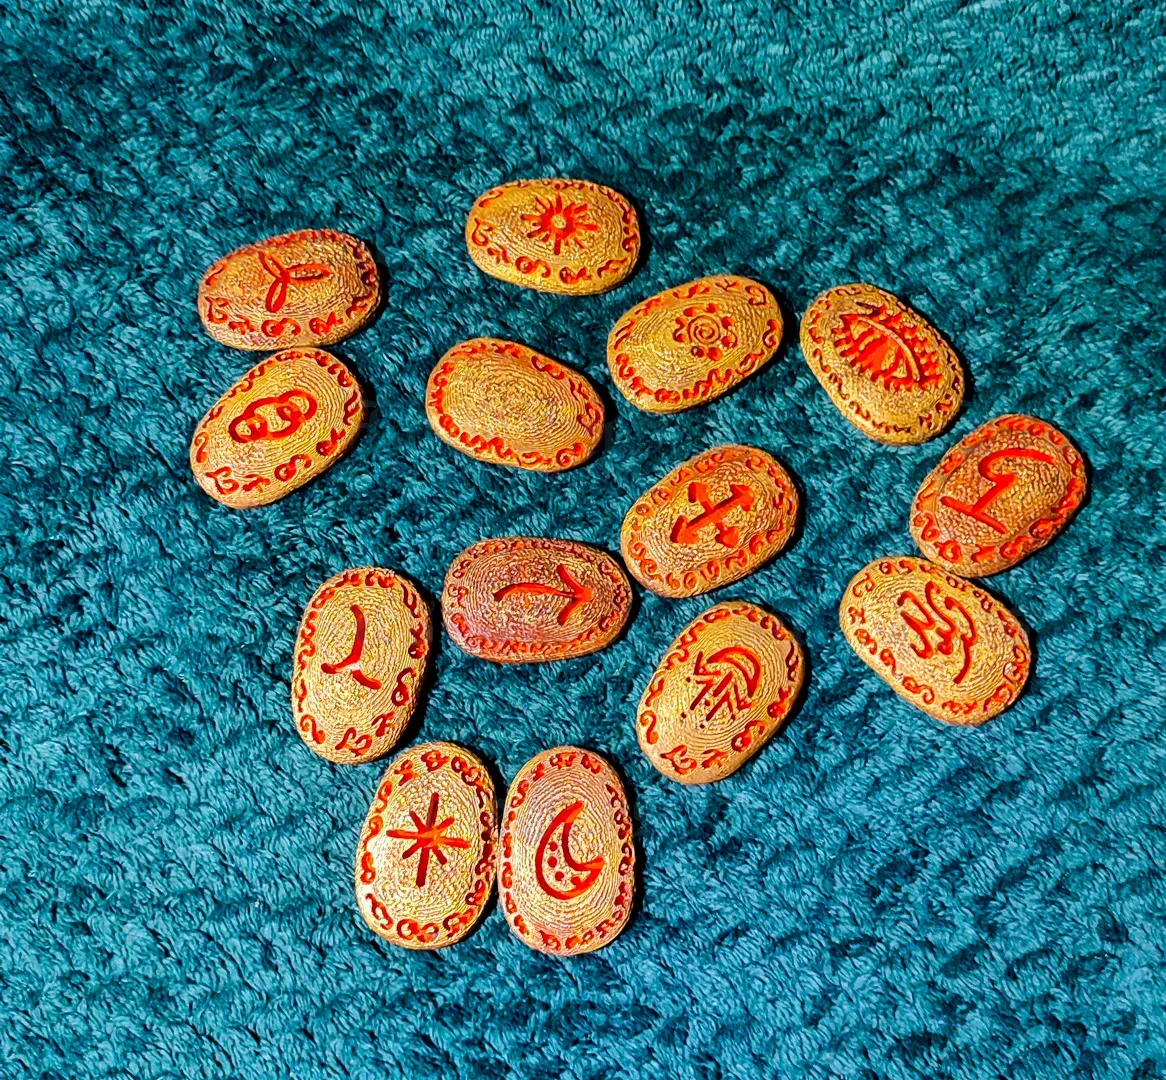 Witch Runes Nordic Mythic Witchcraft Slavic occult